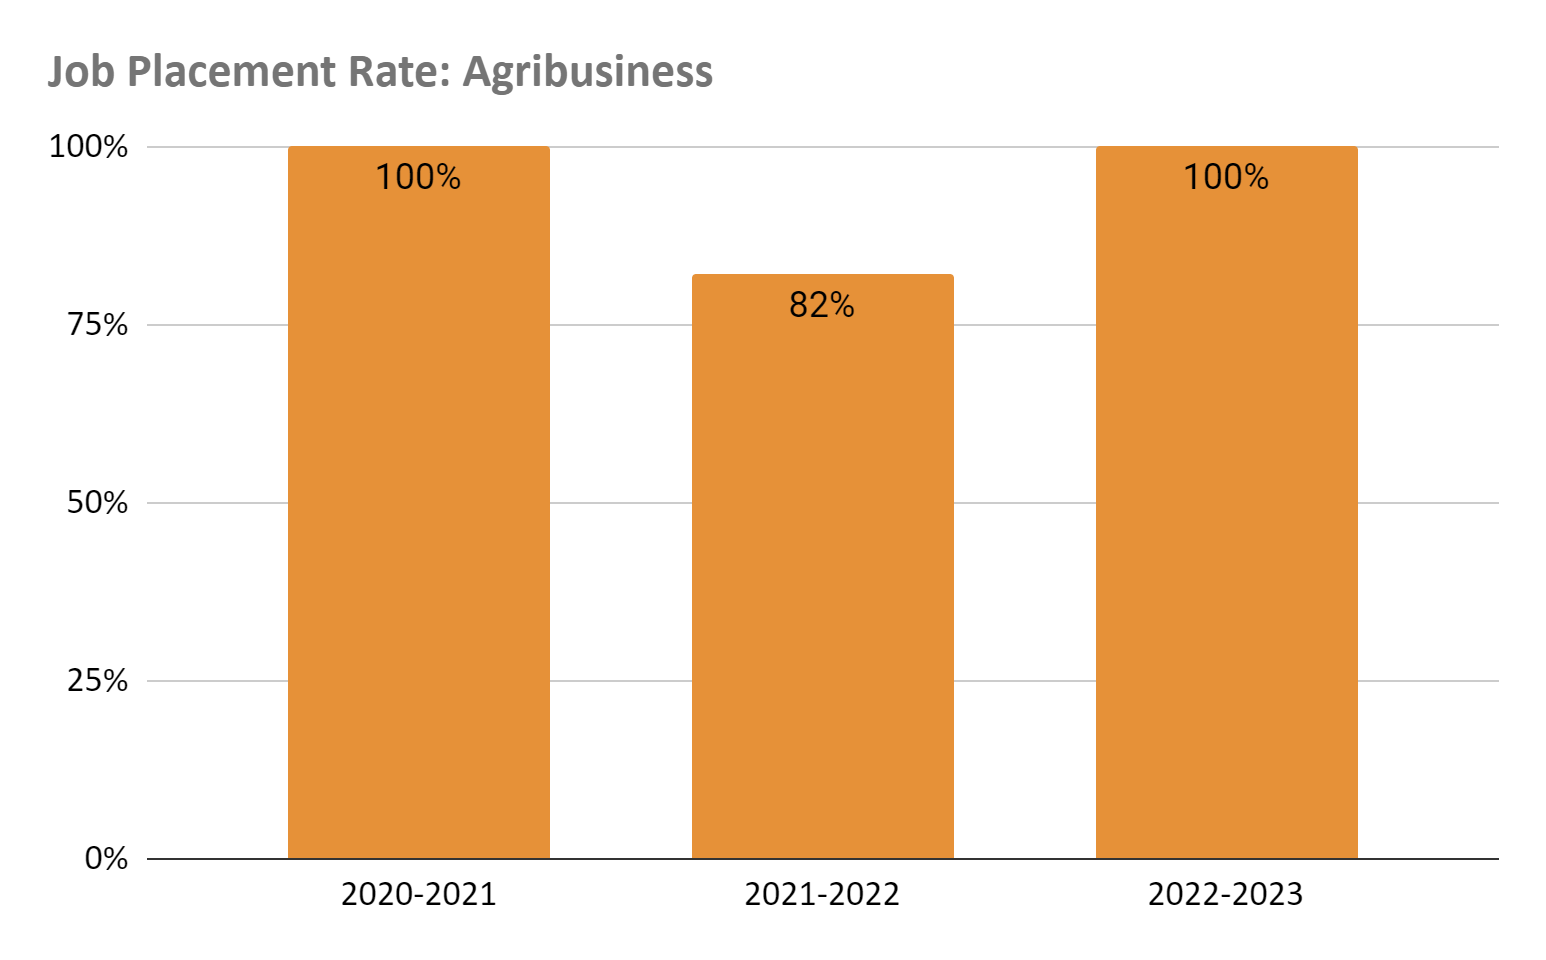 Job Placement Rate - Agribusiness